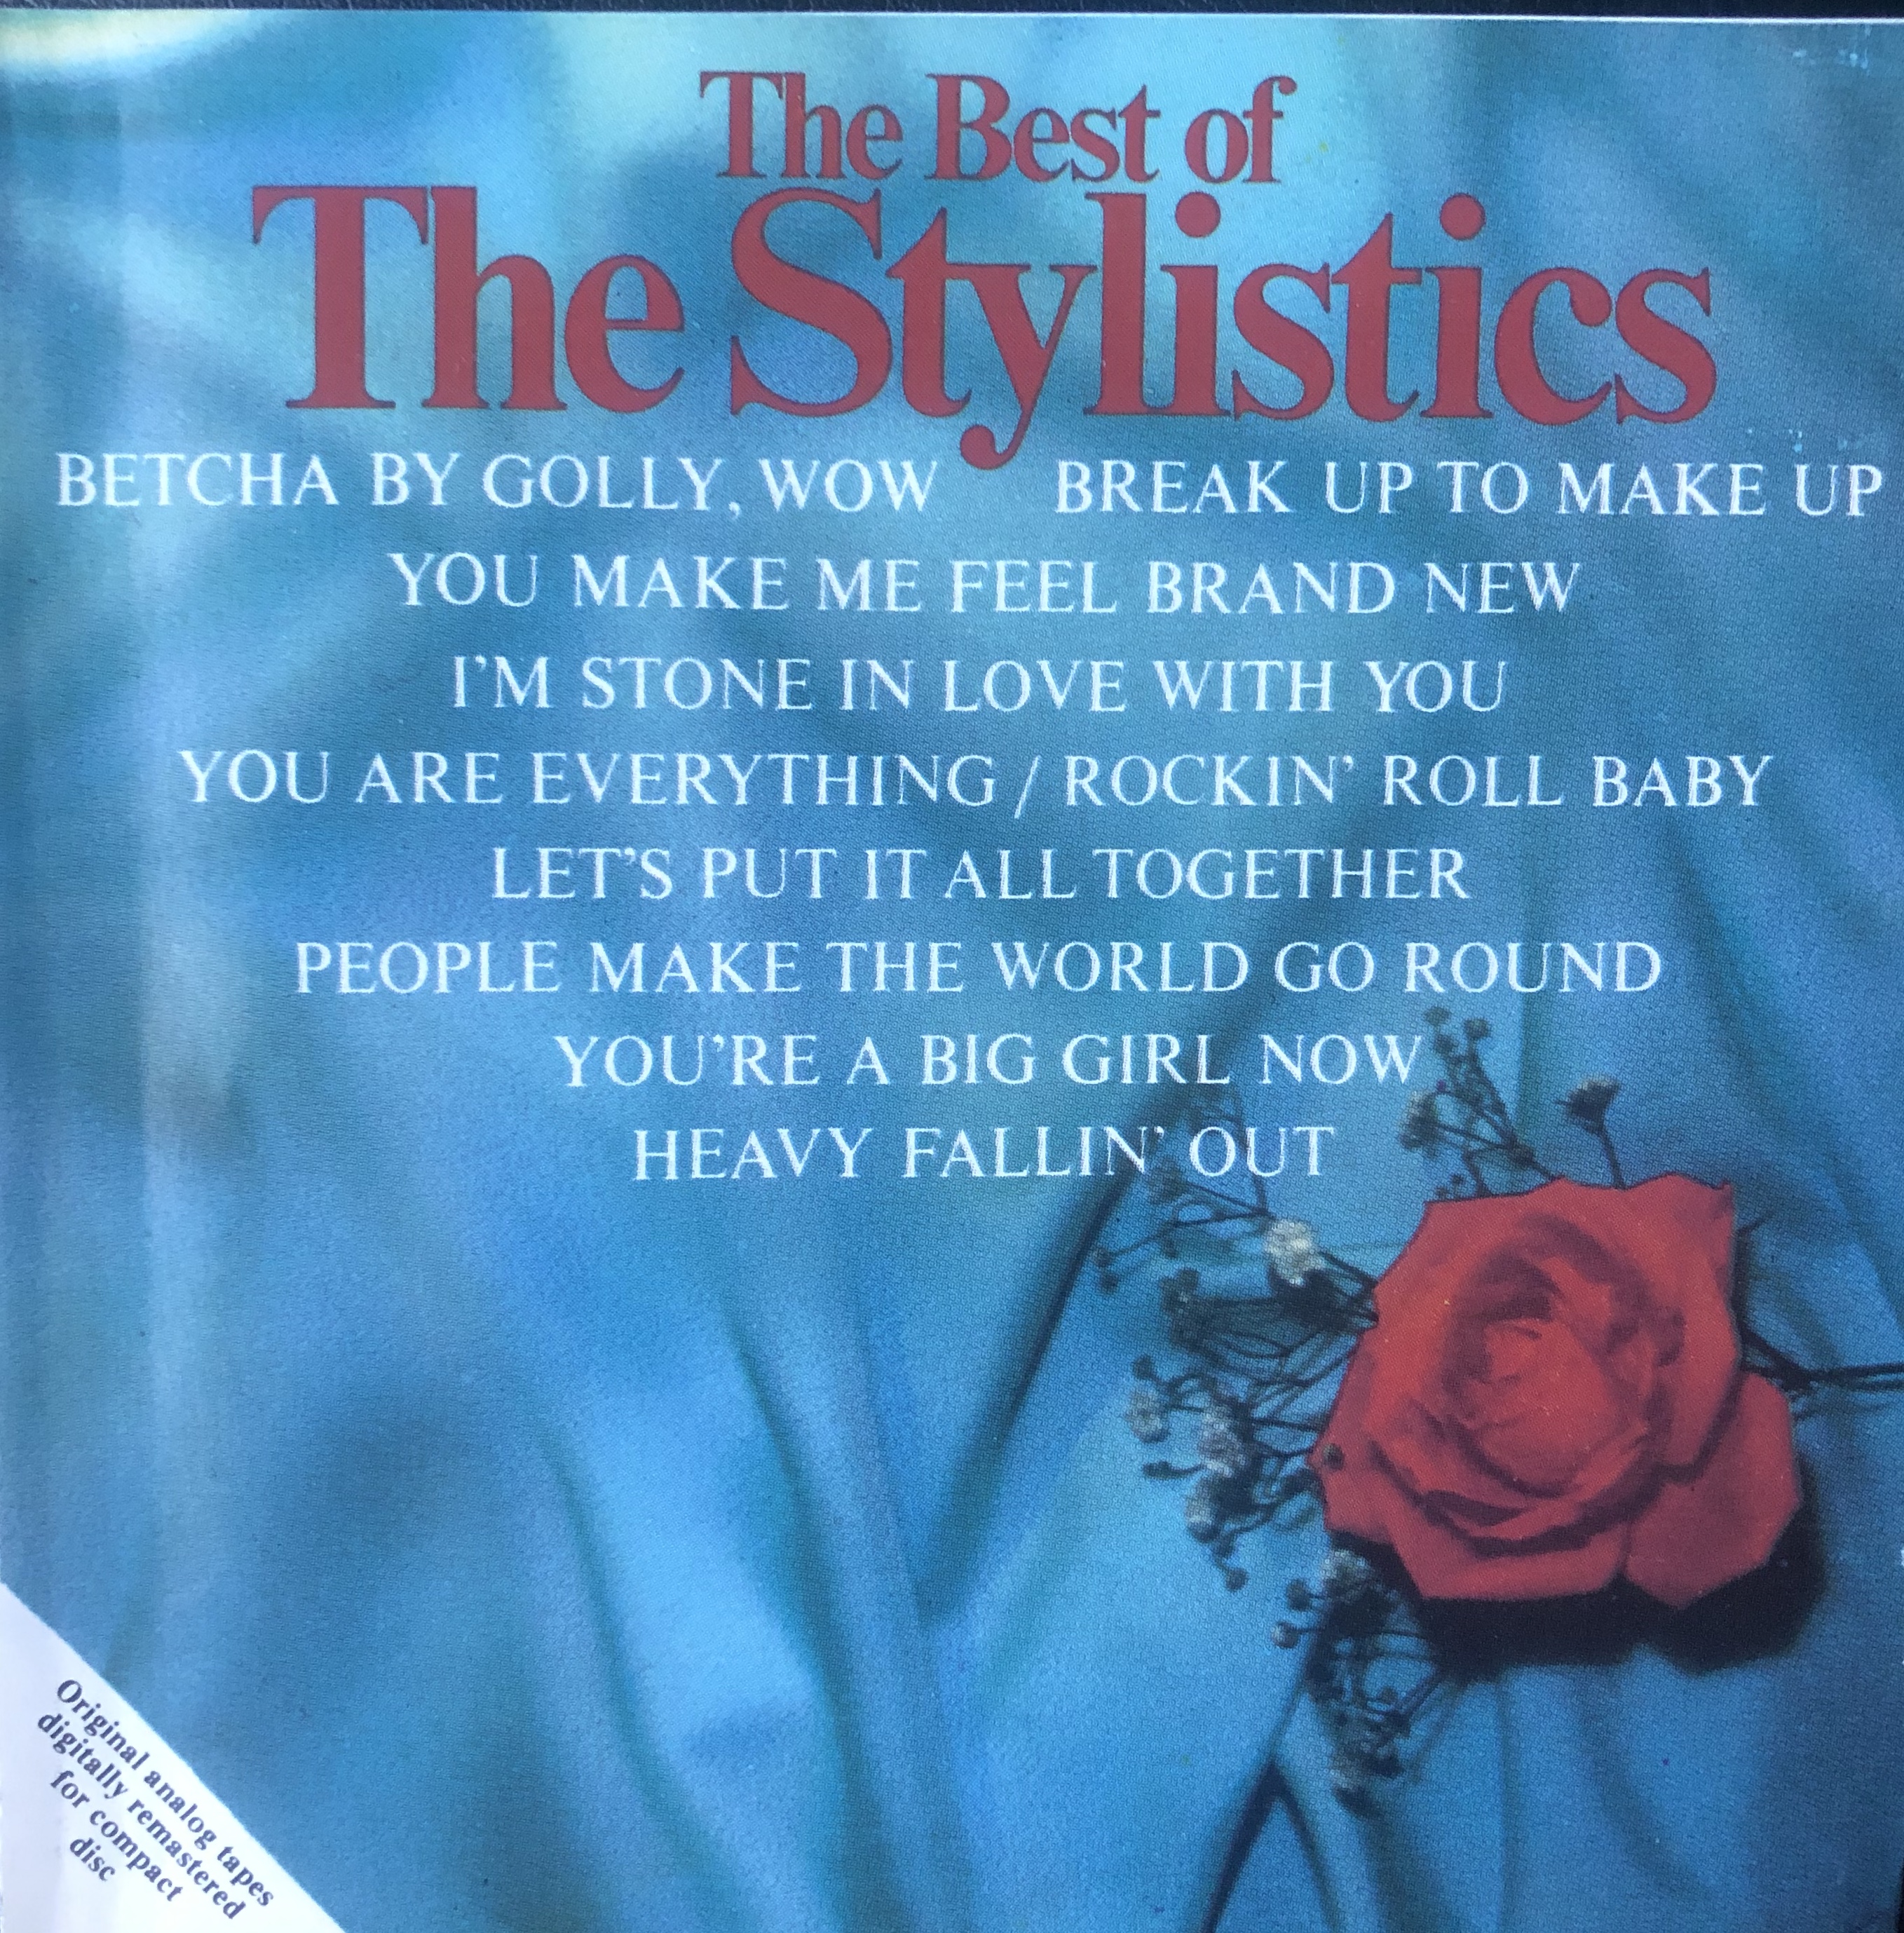 Art for You Make Me Feel Brand New by The Stylistics